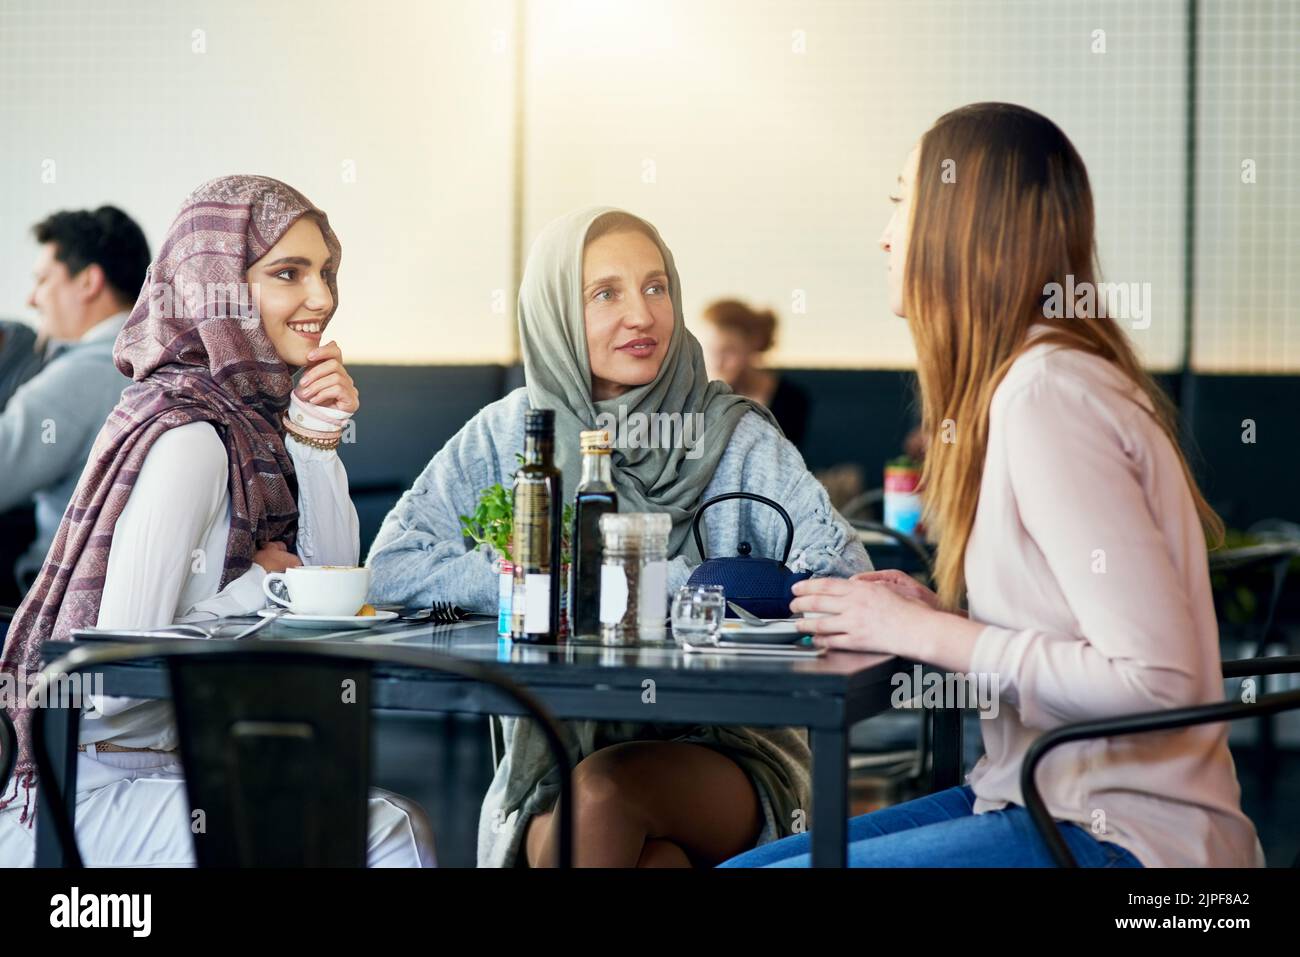 Lunch with the girls. Best way to start the weekend. a group of women chatting over coffee in a cafe. Stock Photo